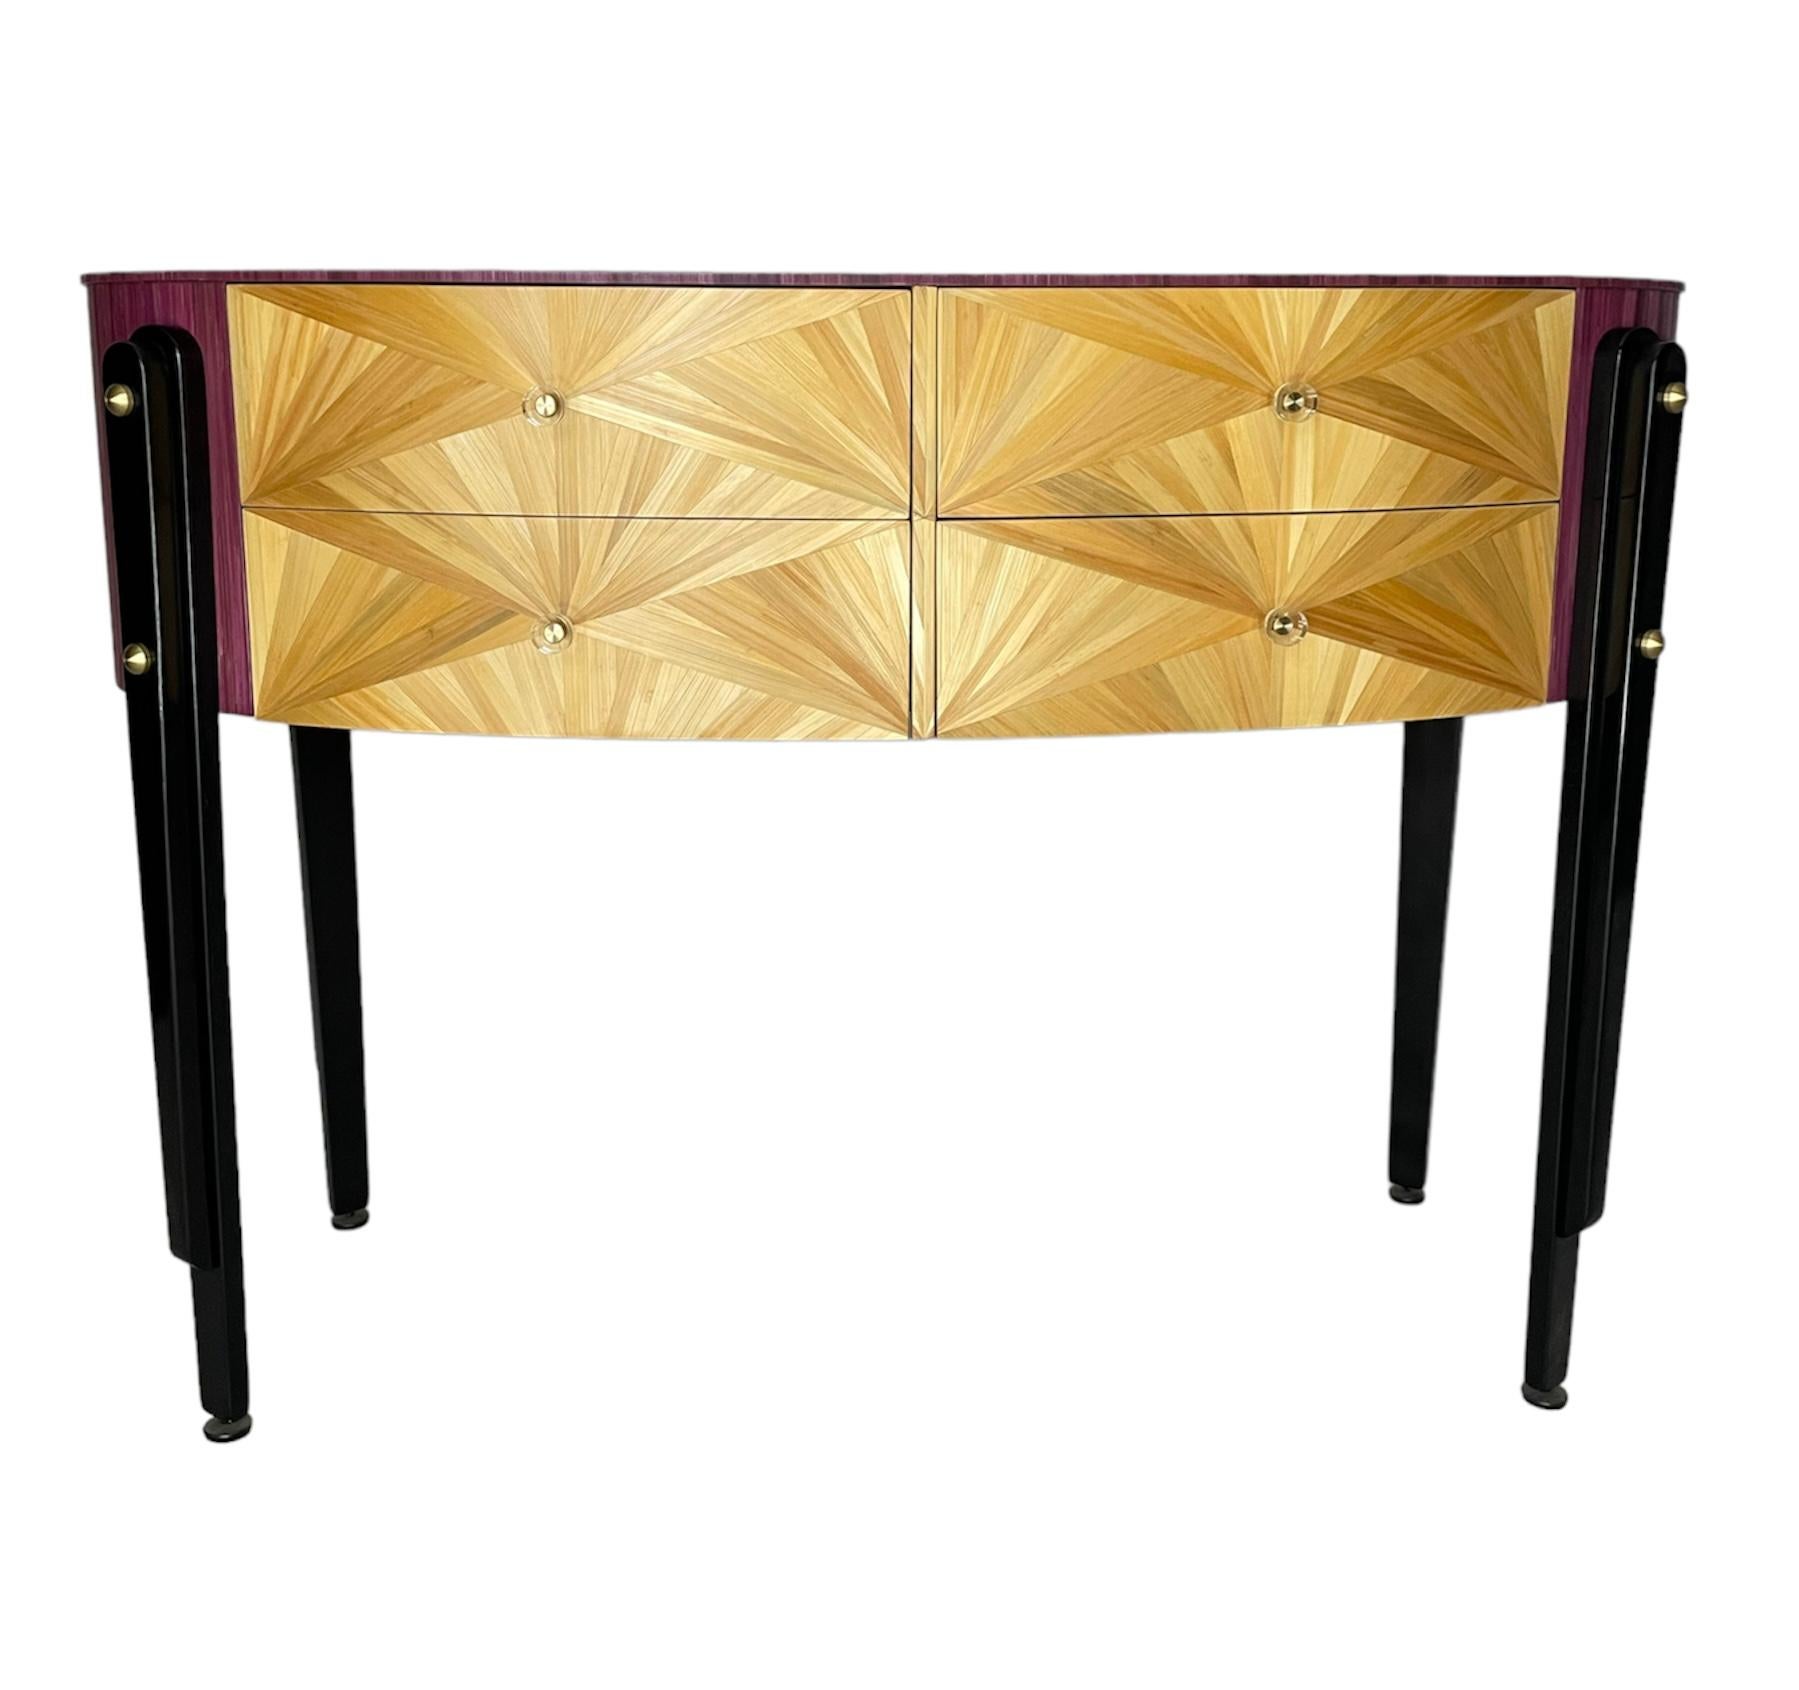 Pair of chest of drawers in the Hollywood regency style, oval in shape with four drawers with glass handles, intervened by Atelier D'art JC in exquisitely shaped straw marquetry and entirely by hand, transforming them into two unique pieces. Unique